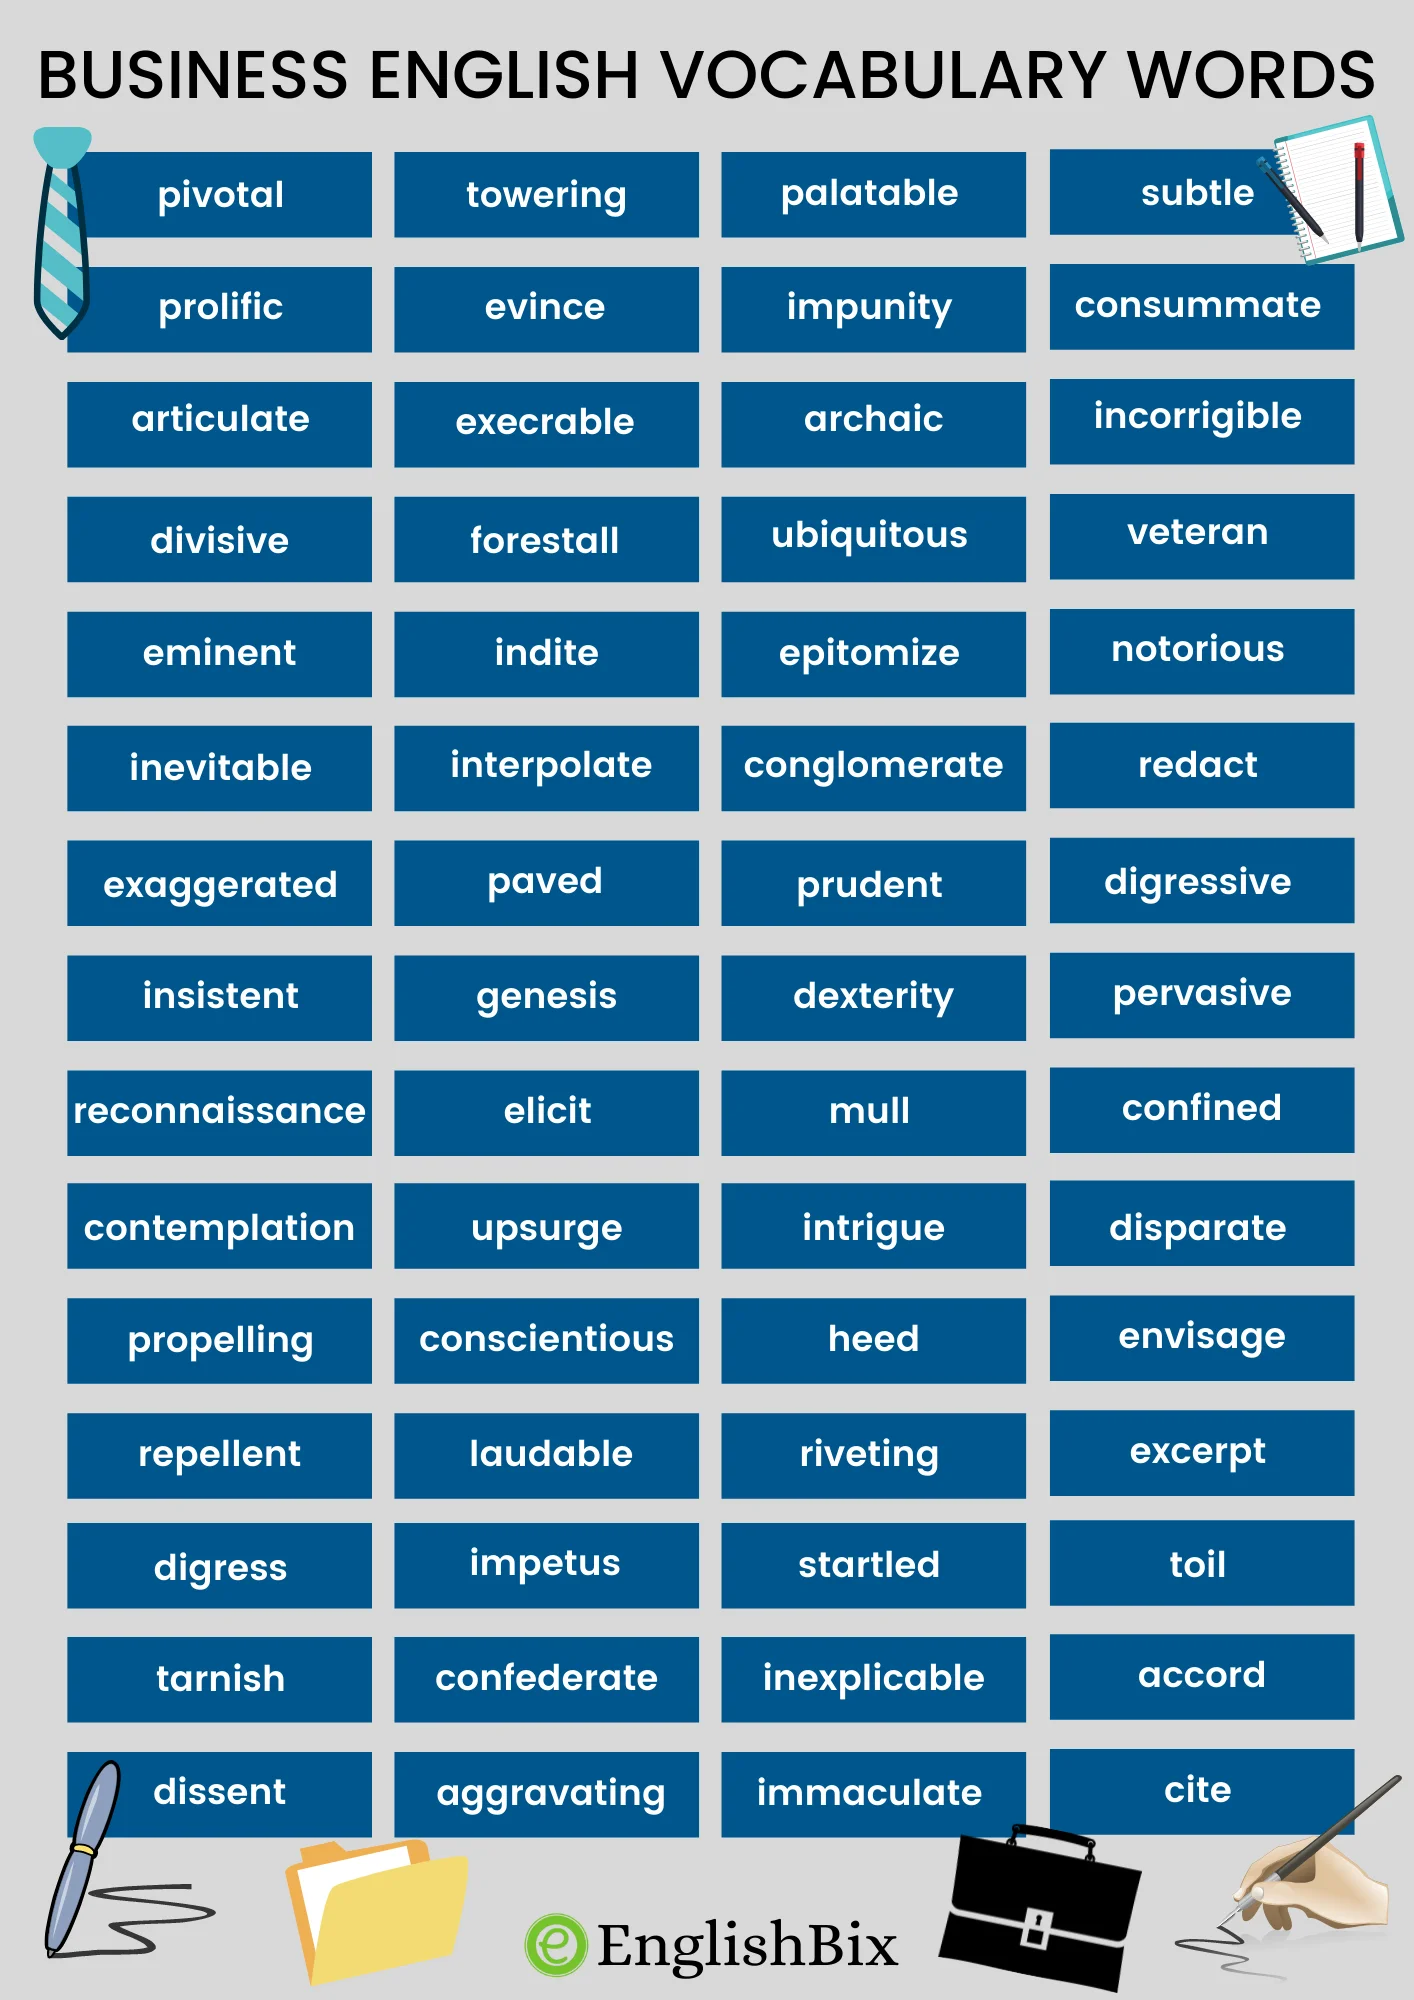 100 Business English Vocabulary Words A to Z with Meaning - EnglishBix